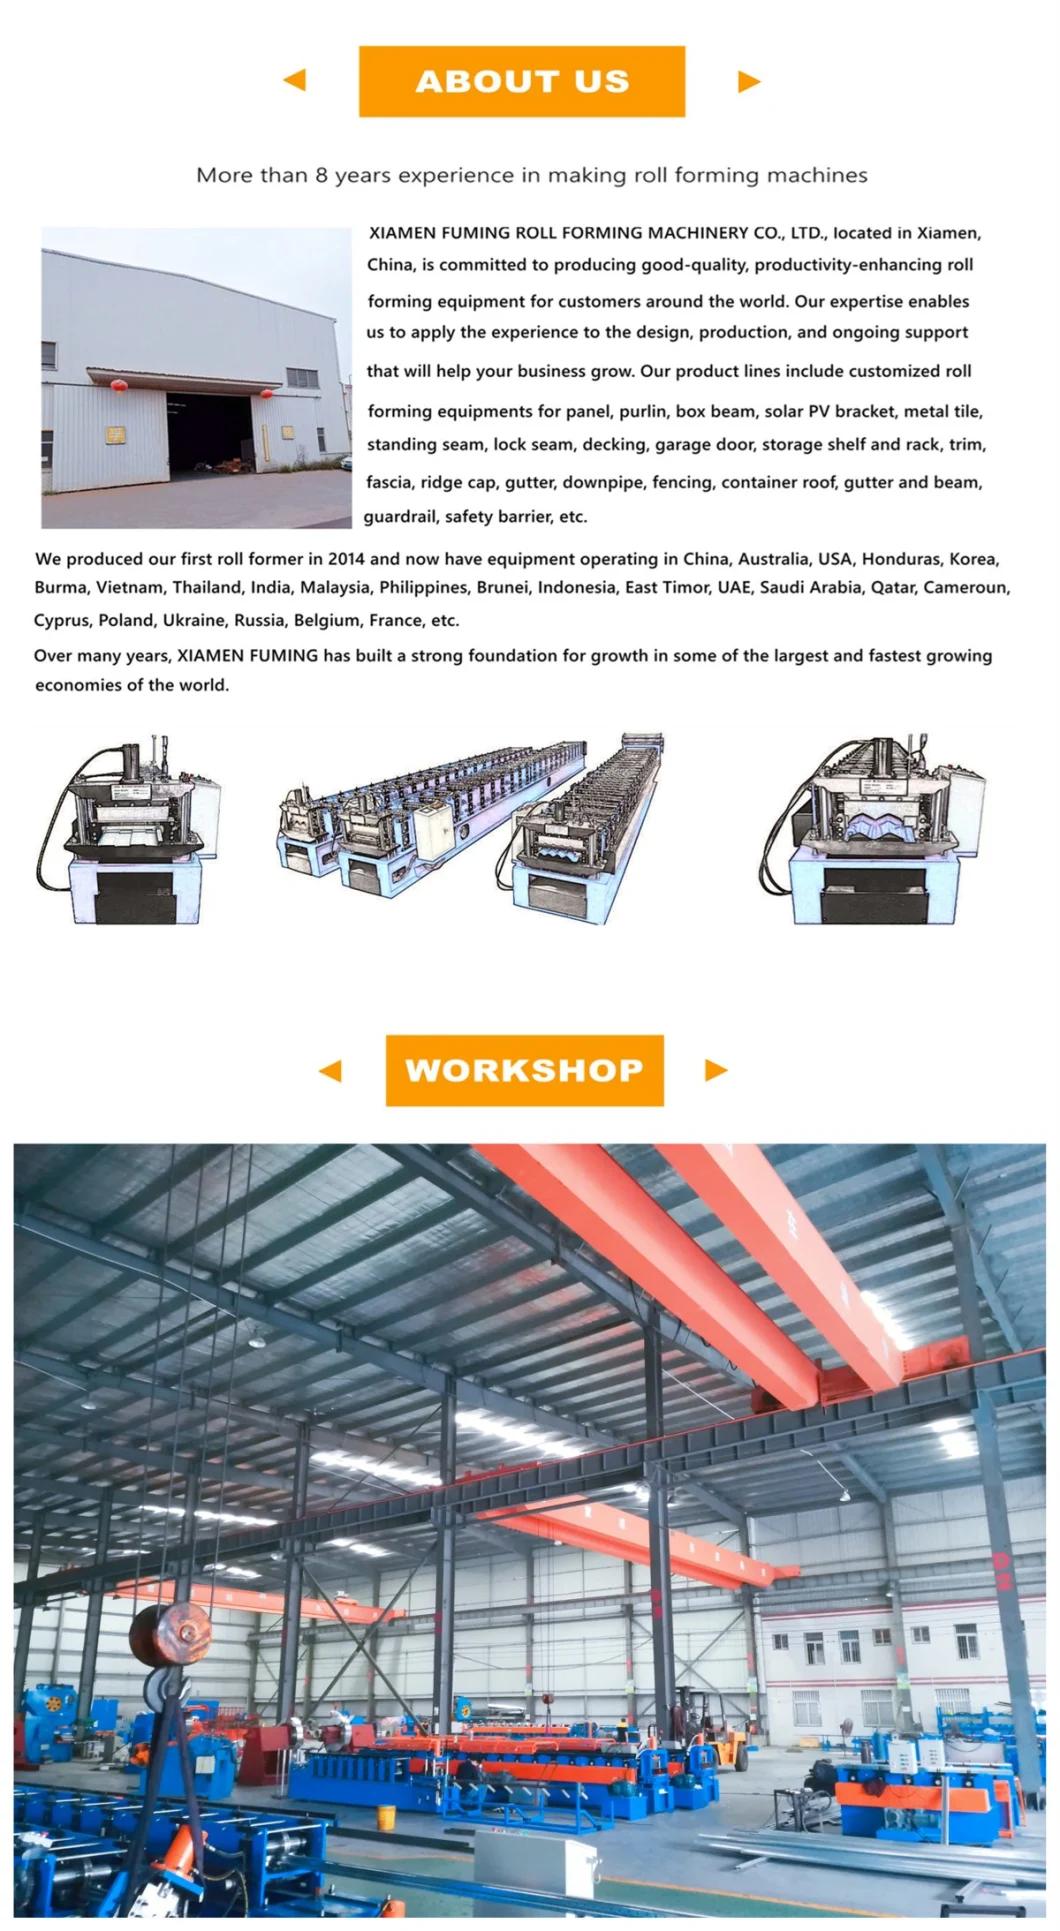 Downpipe, Downspout, Rainspout Gear/Sprocket, Gear Box or Toroidal Worm Roller Forming Tile Making Machine